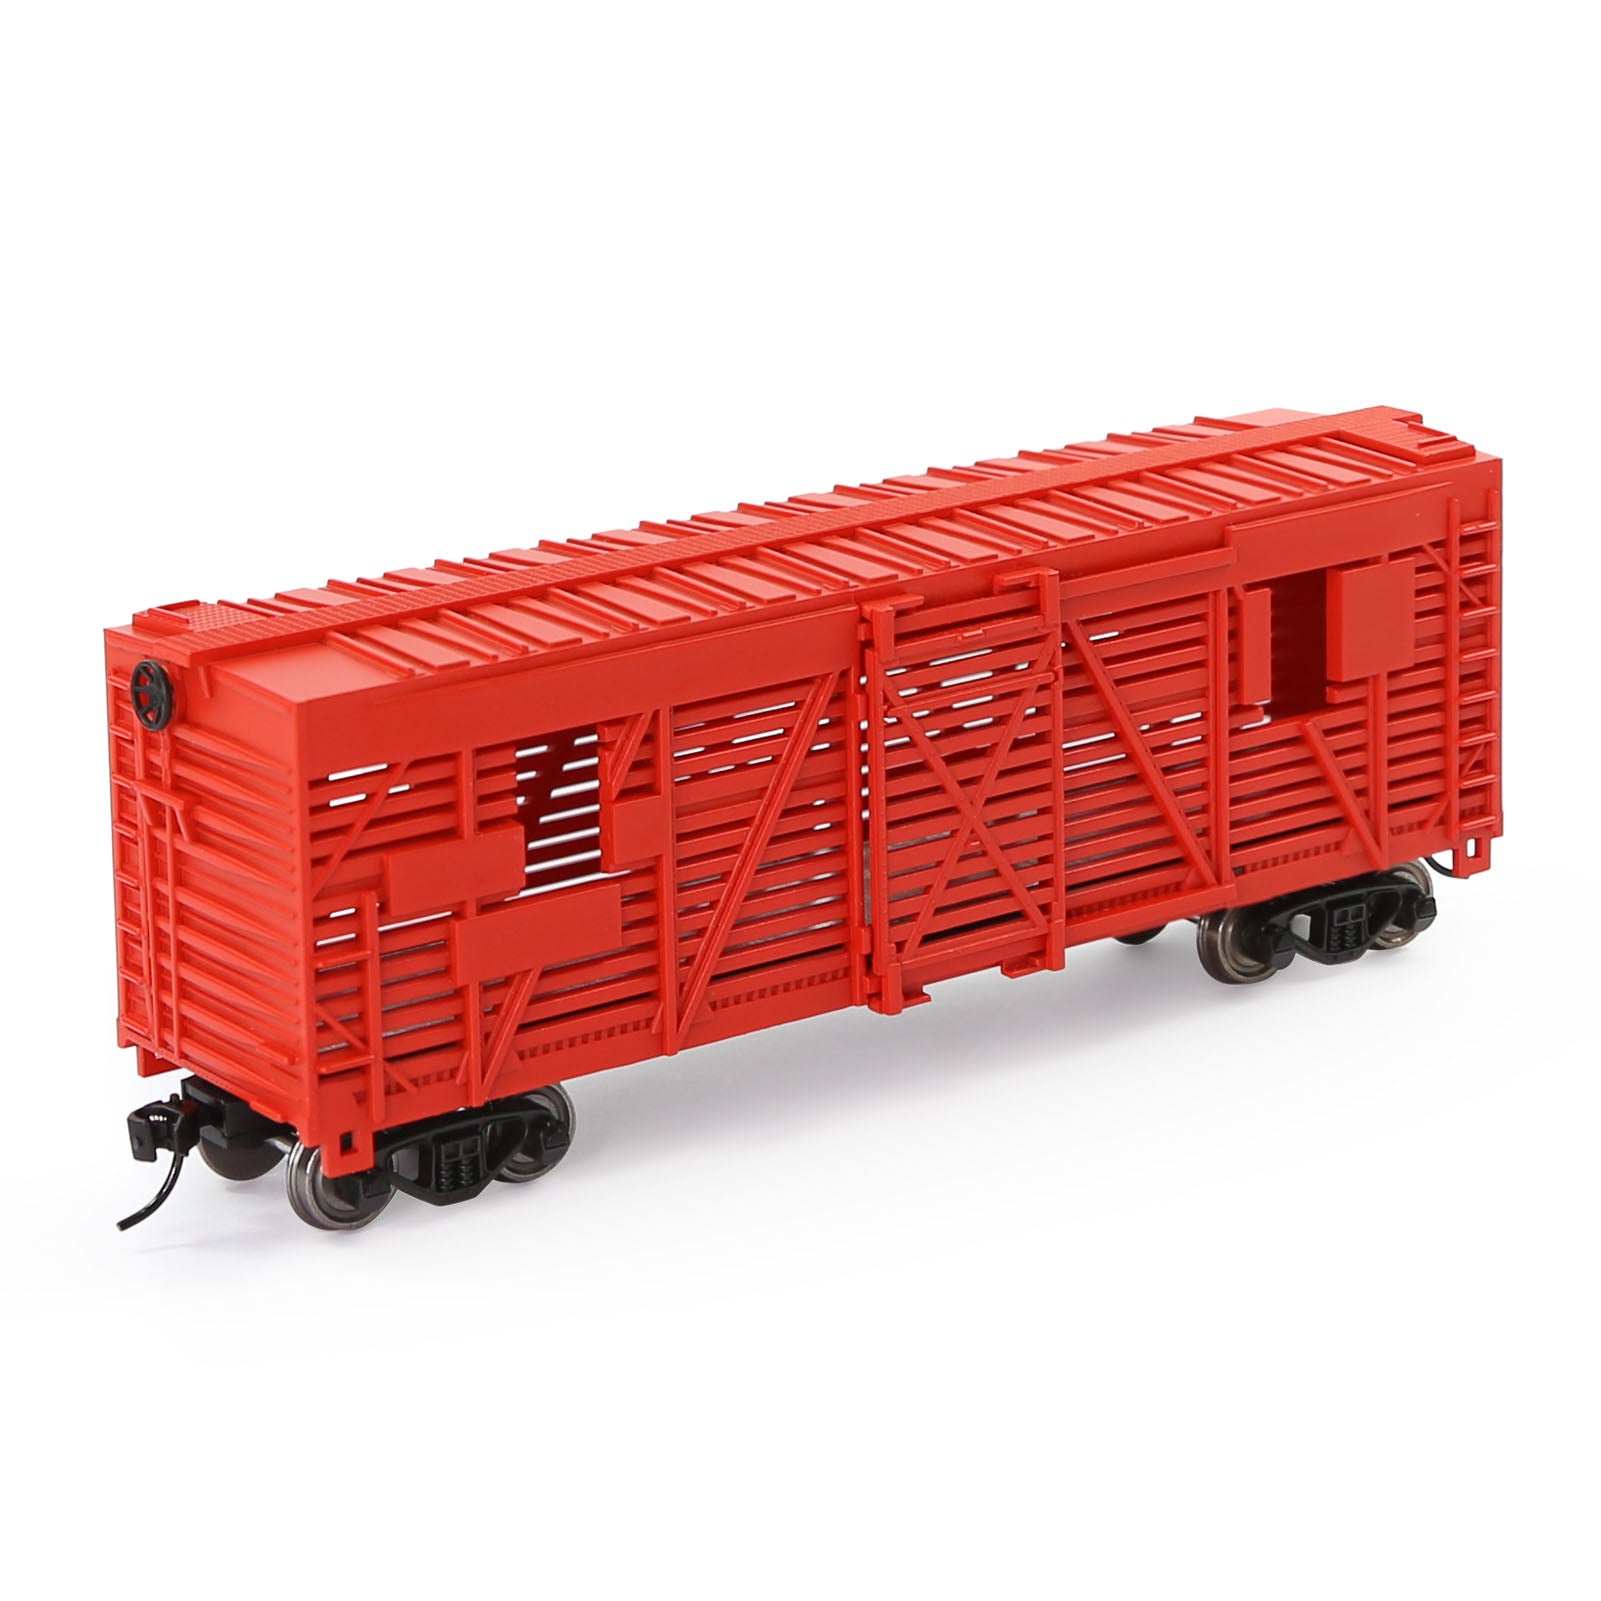 C8767 1 Piece HO Scale 1:87 40' Stock Car Cattle Wagon Painted